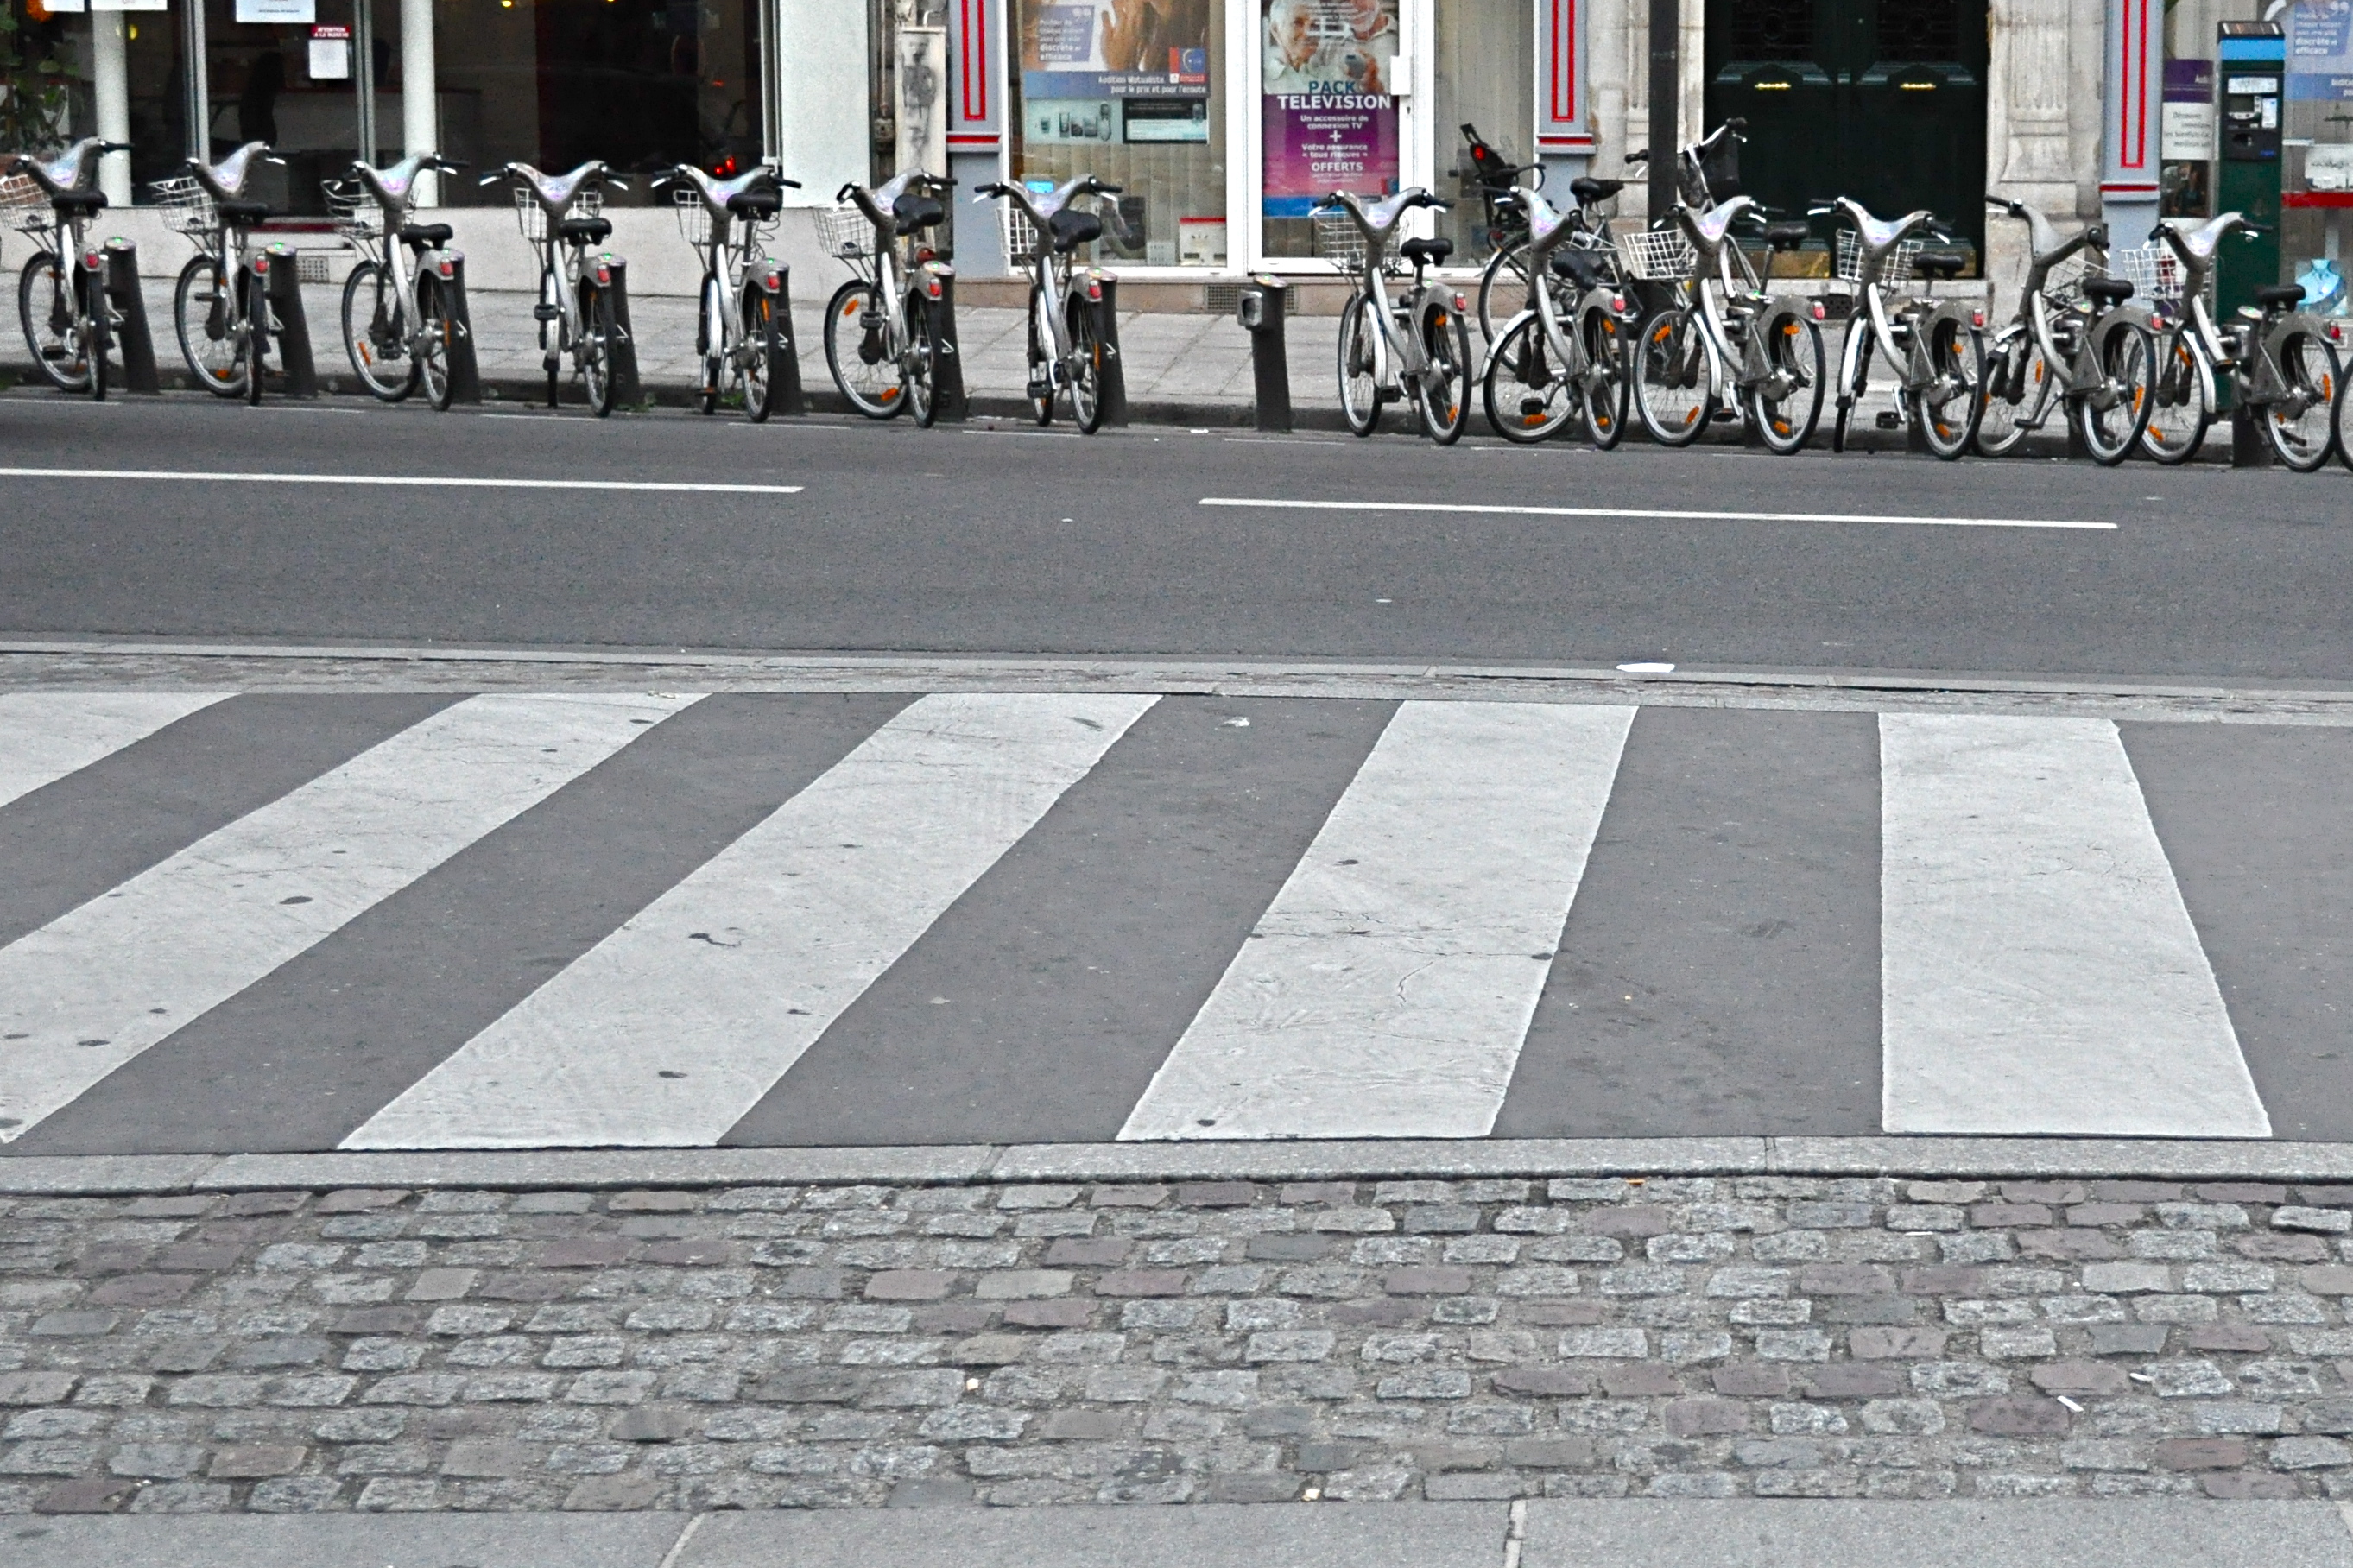 Line of Bikes, Lines in the Street